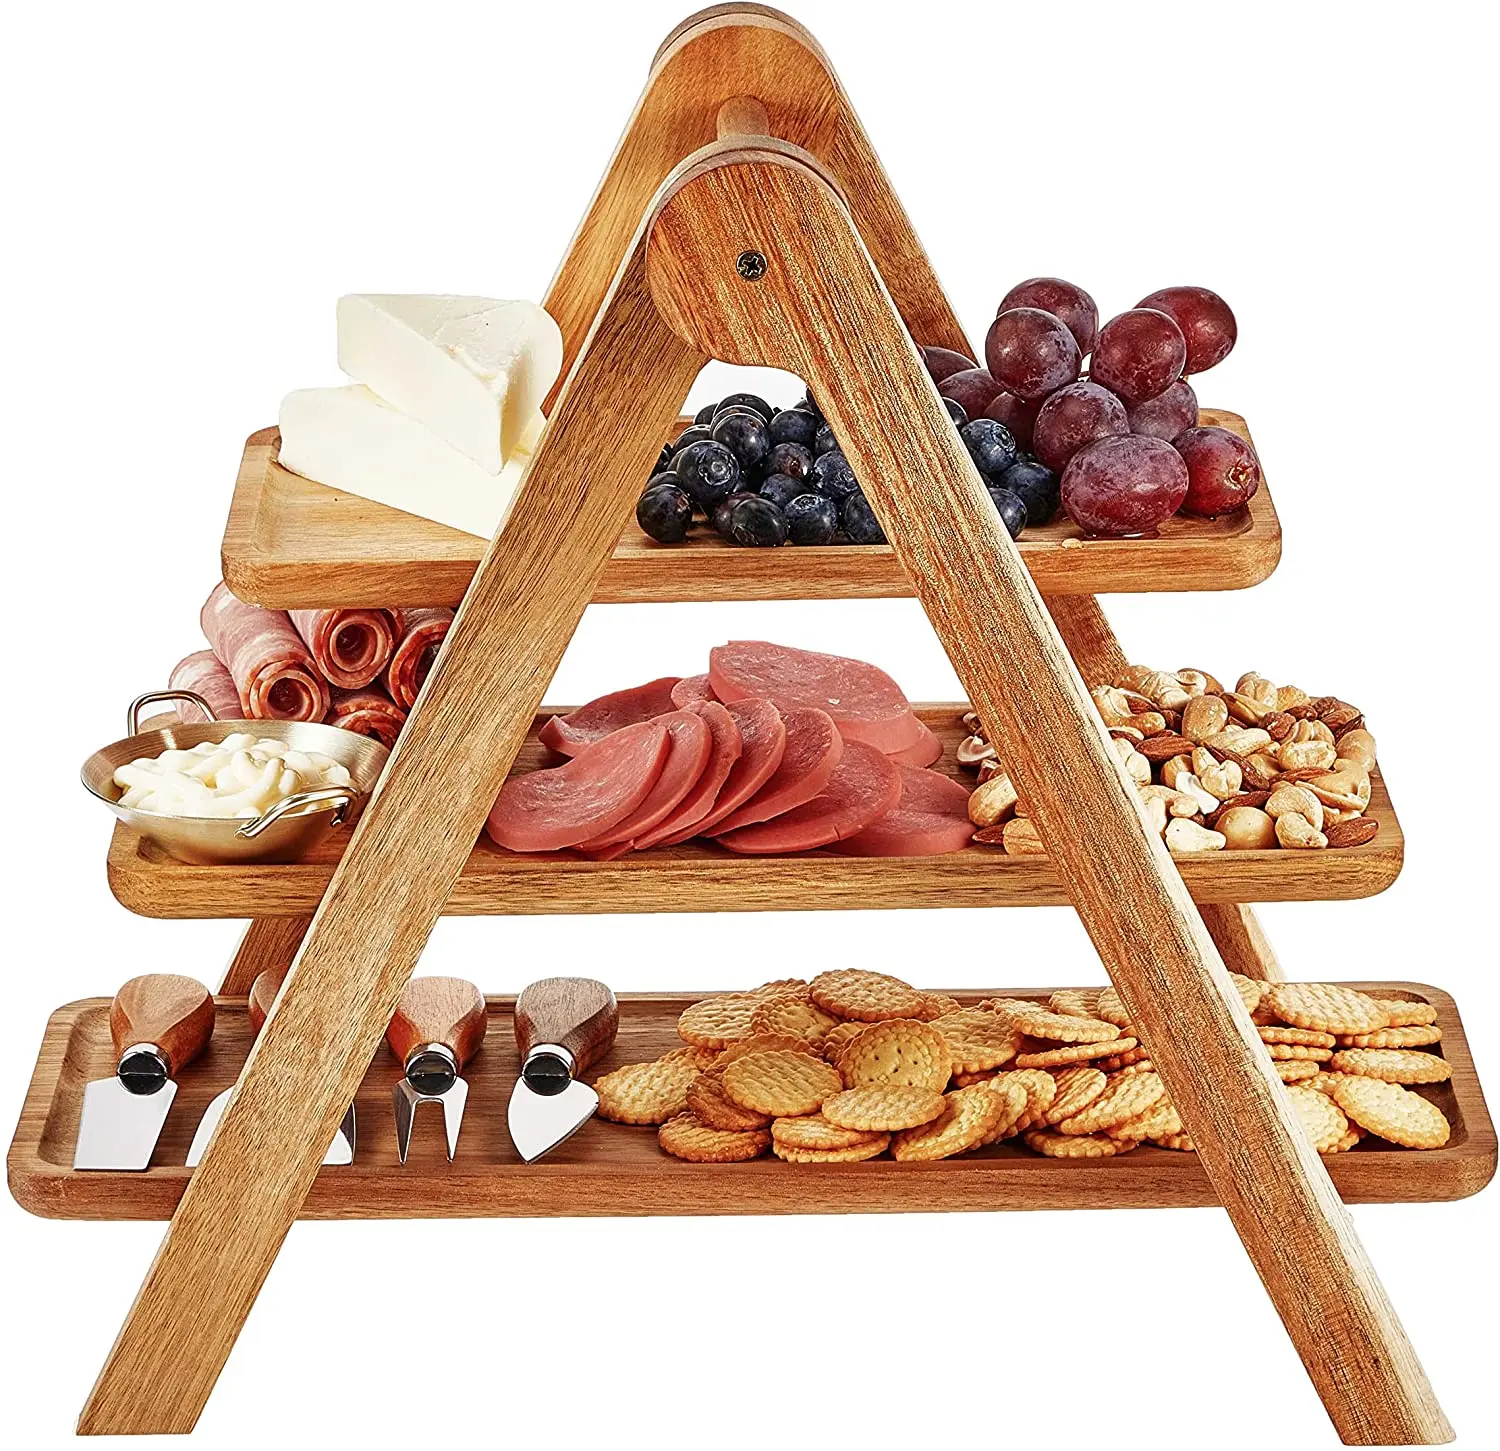 

Three-tiered Cake Display rack Stand holder Cupcake Tiered Wooden Serving Platters Vintage Wood Fruit Tray